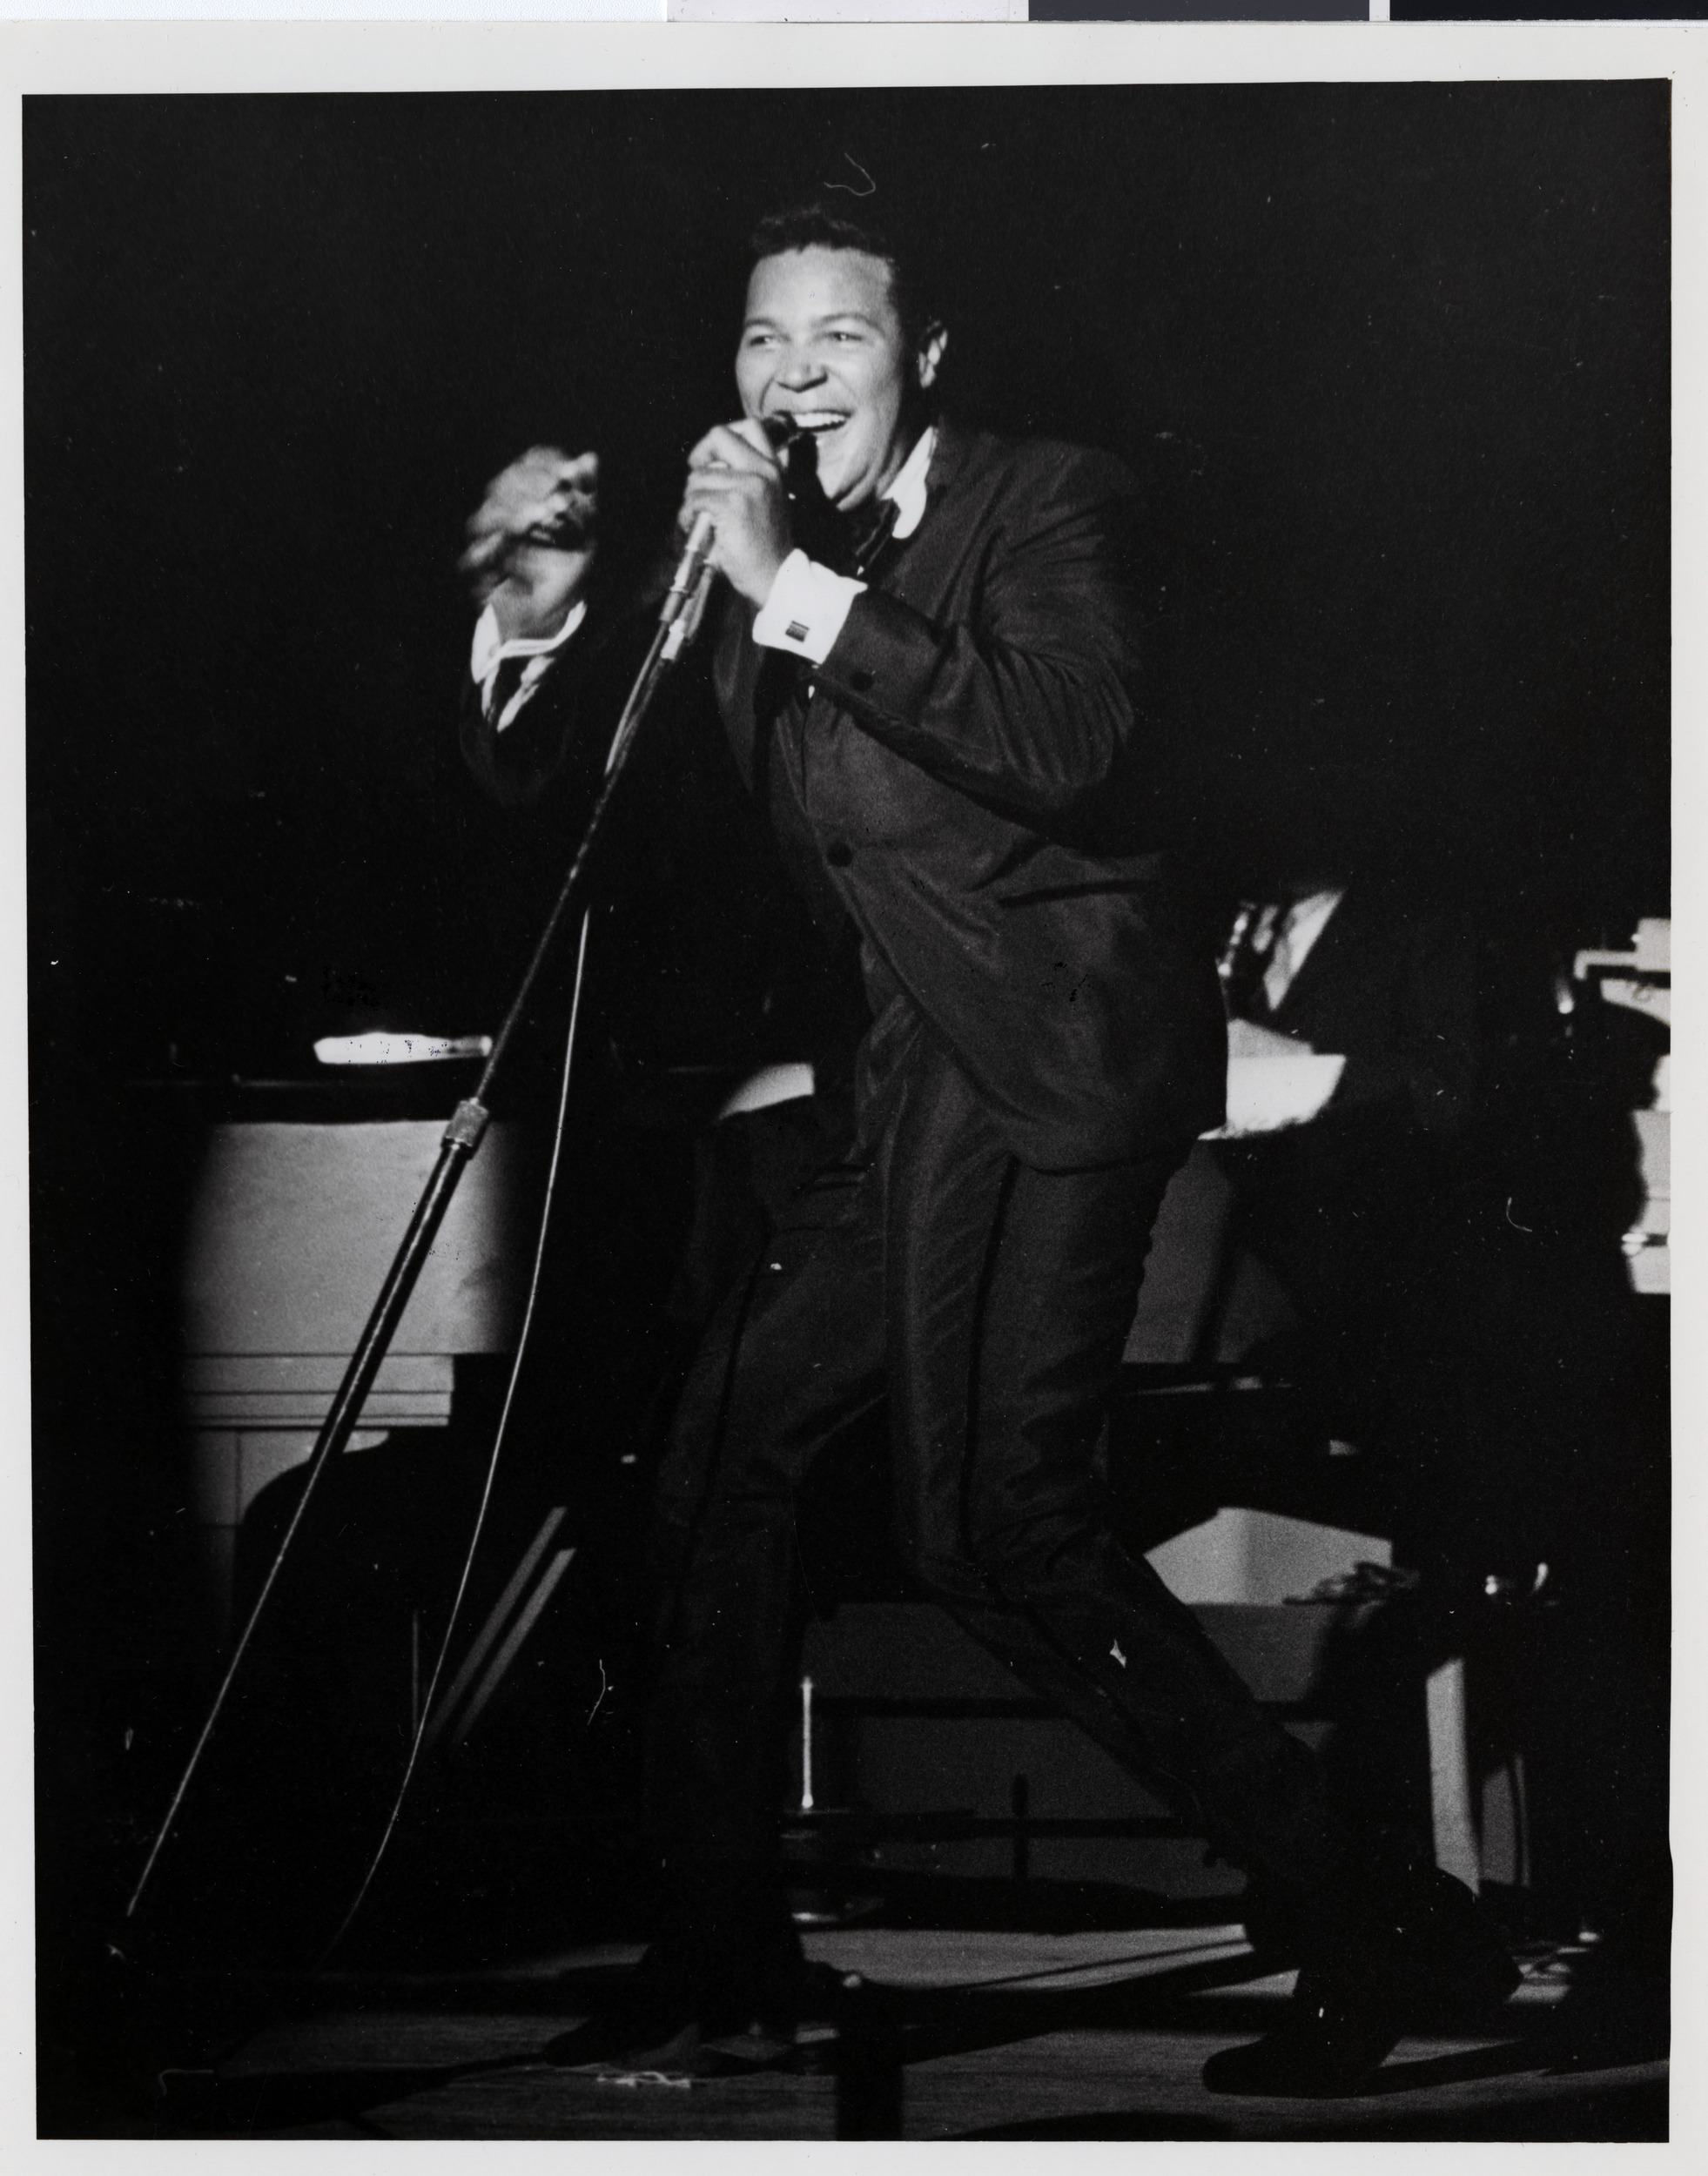 Photograph of Chubby Checker performing onstage at the Sands Hotel, August 1962